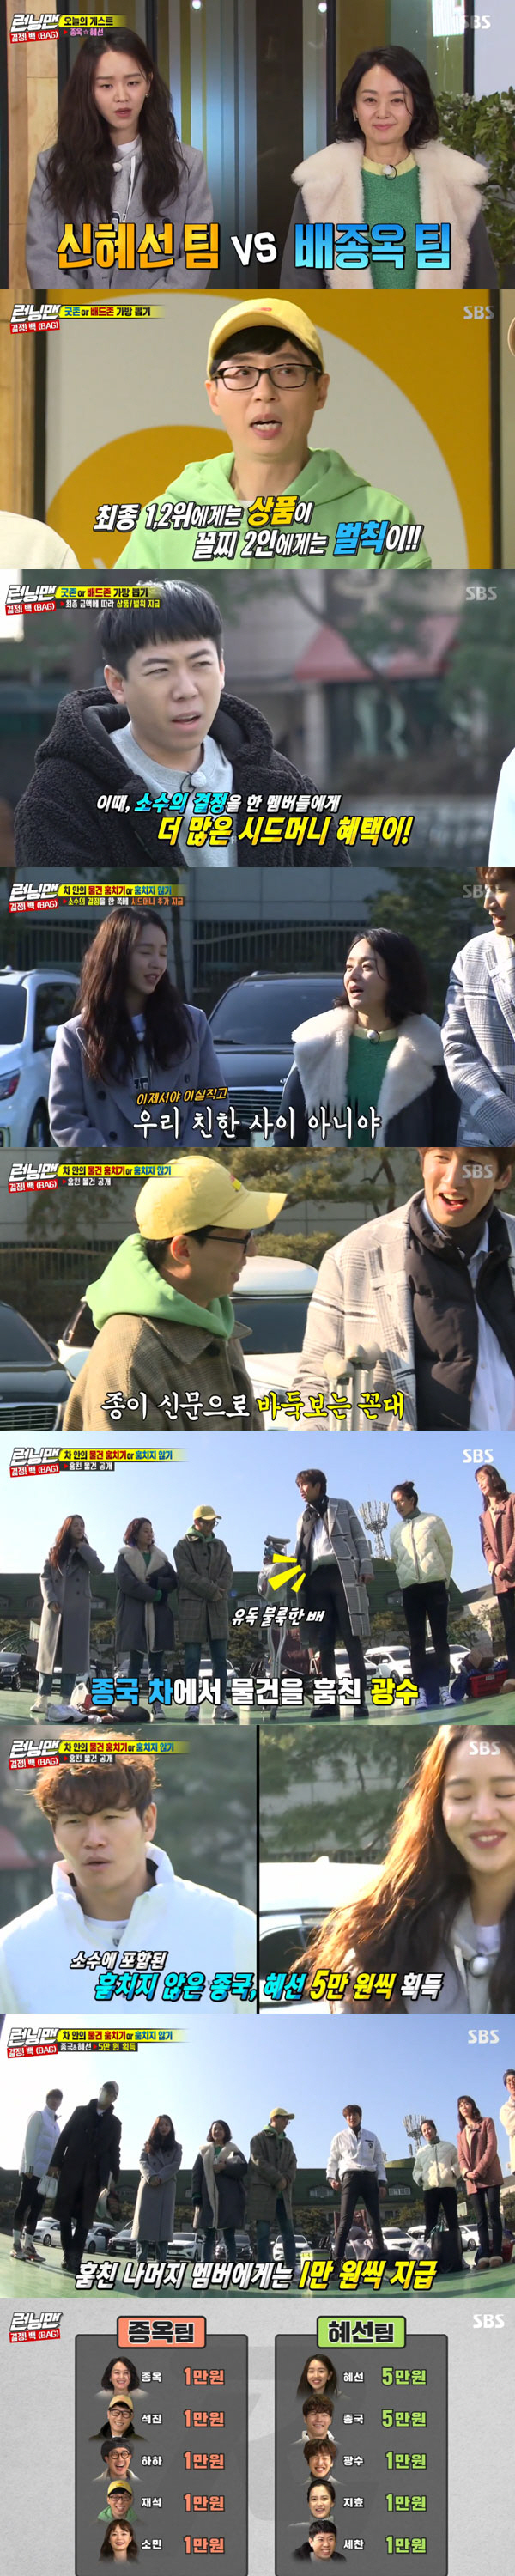 Running Man Bae Jong-ok and Shin Hye-suns entertainment pure beauty Explosion.On SBS Running Man broadcast on the 23rd, Actor Bae Jong-ok and Shin Hye-sun appeared together as Decision! Back (BAG), Decision Race.Shin Hye-sun, who made his first appearance as a regular guest of Running Man on the day, was nervous and nervous.Shin Hye-sun said, Give me a greeting. Where are you looking? And Ji Suk-jin said, Just look at it.Also, Bae Jong-ok said, It is quite burdensome that I can follow, but I think it is possible because I have a fellow-age Seokjin. Ji Suk-jin said, I can walk when I run.I just have to move like Im busy with my upper body, he said, laughing.Race was played by the Shin Hye-sun team and the Bae Jong-ok team.Good Zone has 19 plus amounts, 9 minus amounts, 1 change chance, 2 times chance, Bad Zone has 9 plus amounts, 19 minus amounts, 1 change chance, and 2 times chance.In a total of three rounds, each round winning team Choices the bag in Good Zone and the defeat team Choices the bag in Bad Zone.After each round bag is drawn, the ranking and holding amount will be released in full: the final number one and the second place will be punished by the last two.First, we will carry out a mission to acquire individual seed money, decide whether to steal the goods in the car within 10 minutes of the time limit after boarding the car of another person except the car among the 10 cars used by the members and guests.At this time, members who have made a few decisions will receive more seed money benefits.If the stolen item is a small number, 5,000 won will be paid to the stolen item, and 50,000 won will be paid to all those who have not stolen the item.The number of people who can not reach the minority is paid only the basic seed money.Kim Jong-kook and Shin Hye-sun, who were not included in the small number of mission results, won 50,000 won each, and the remaining members who stole 10,000 won received 10,000 won.Meanwhile, Yoo Jae-Suk, who had finished time after Ji Suk-jin, was judged while Running Countdown was held last week.Kim Jong-kook also removed Hahas name tag, and Kim Jong-kook, who had more time than Haha, won half of Hahas time.Kim Jong-kook also removed Yang Se-chans name tag, while Yang Se-chan and Song Ji-hyo took the time off while Kim Jong-kook and Heo Kyung-hwan took 52 minutes.Among these, the first room of time opened, and Haha first headed to the room of time. Haha acquired one place and time replacement right and replaced time with strong me.Haha headed there when he opened in the second time room, and when he got the right to replace time with one person, he replaced Lee Kwang-soo with the most time left.Heo Kyung-hwan, who acquired half the time of one person in the third time room, replaced Kim Jong-kook with time, but in the fourth time room Kim Jong-kook acquired a time replacement with one person and replaced him with Heo Kyung-hwan.Kim Jong-kook, Haha, Heo Kyung-hwan remained in the fierce game that took away and took away each others time, and the final winner was Kim Jong-kook.Kim Jong-kook and Haha had earlier planned the operation, and Kim Jong-kook promised Haha, I will get honor and give you the goods.As a result, Kim Jong-kook won the final title by removing Heo Kyung-hwans name tag.